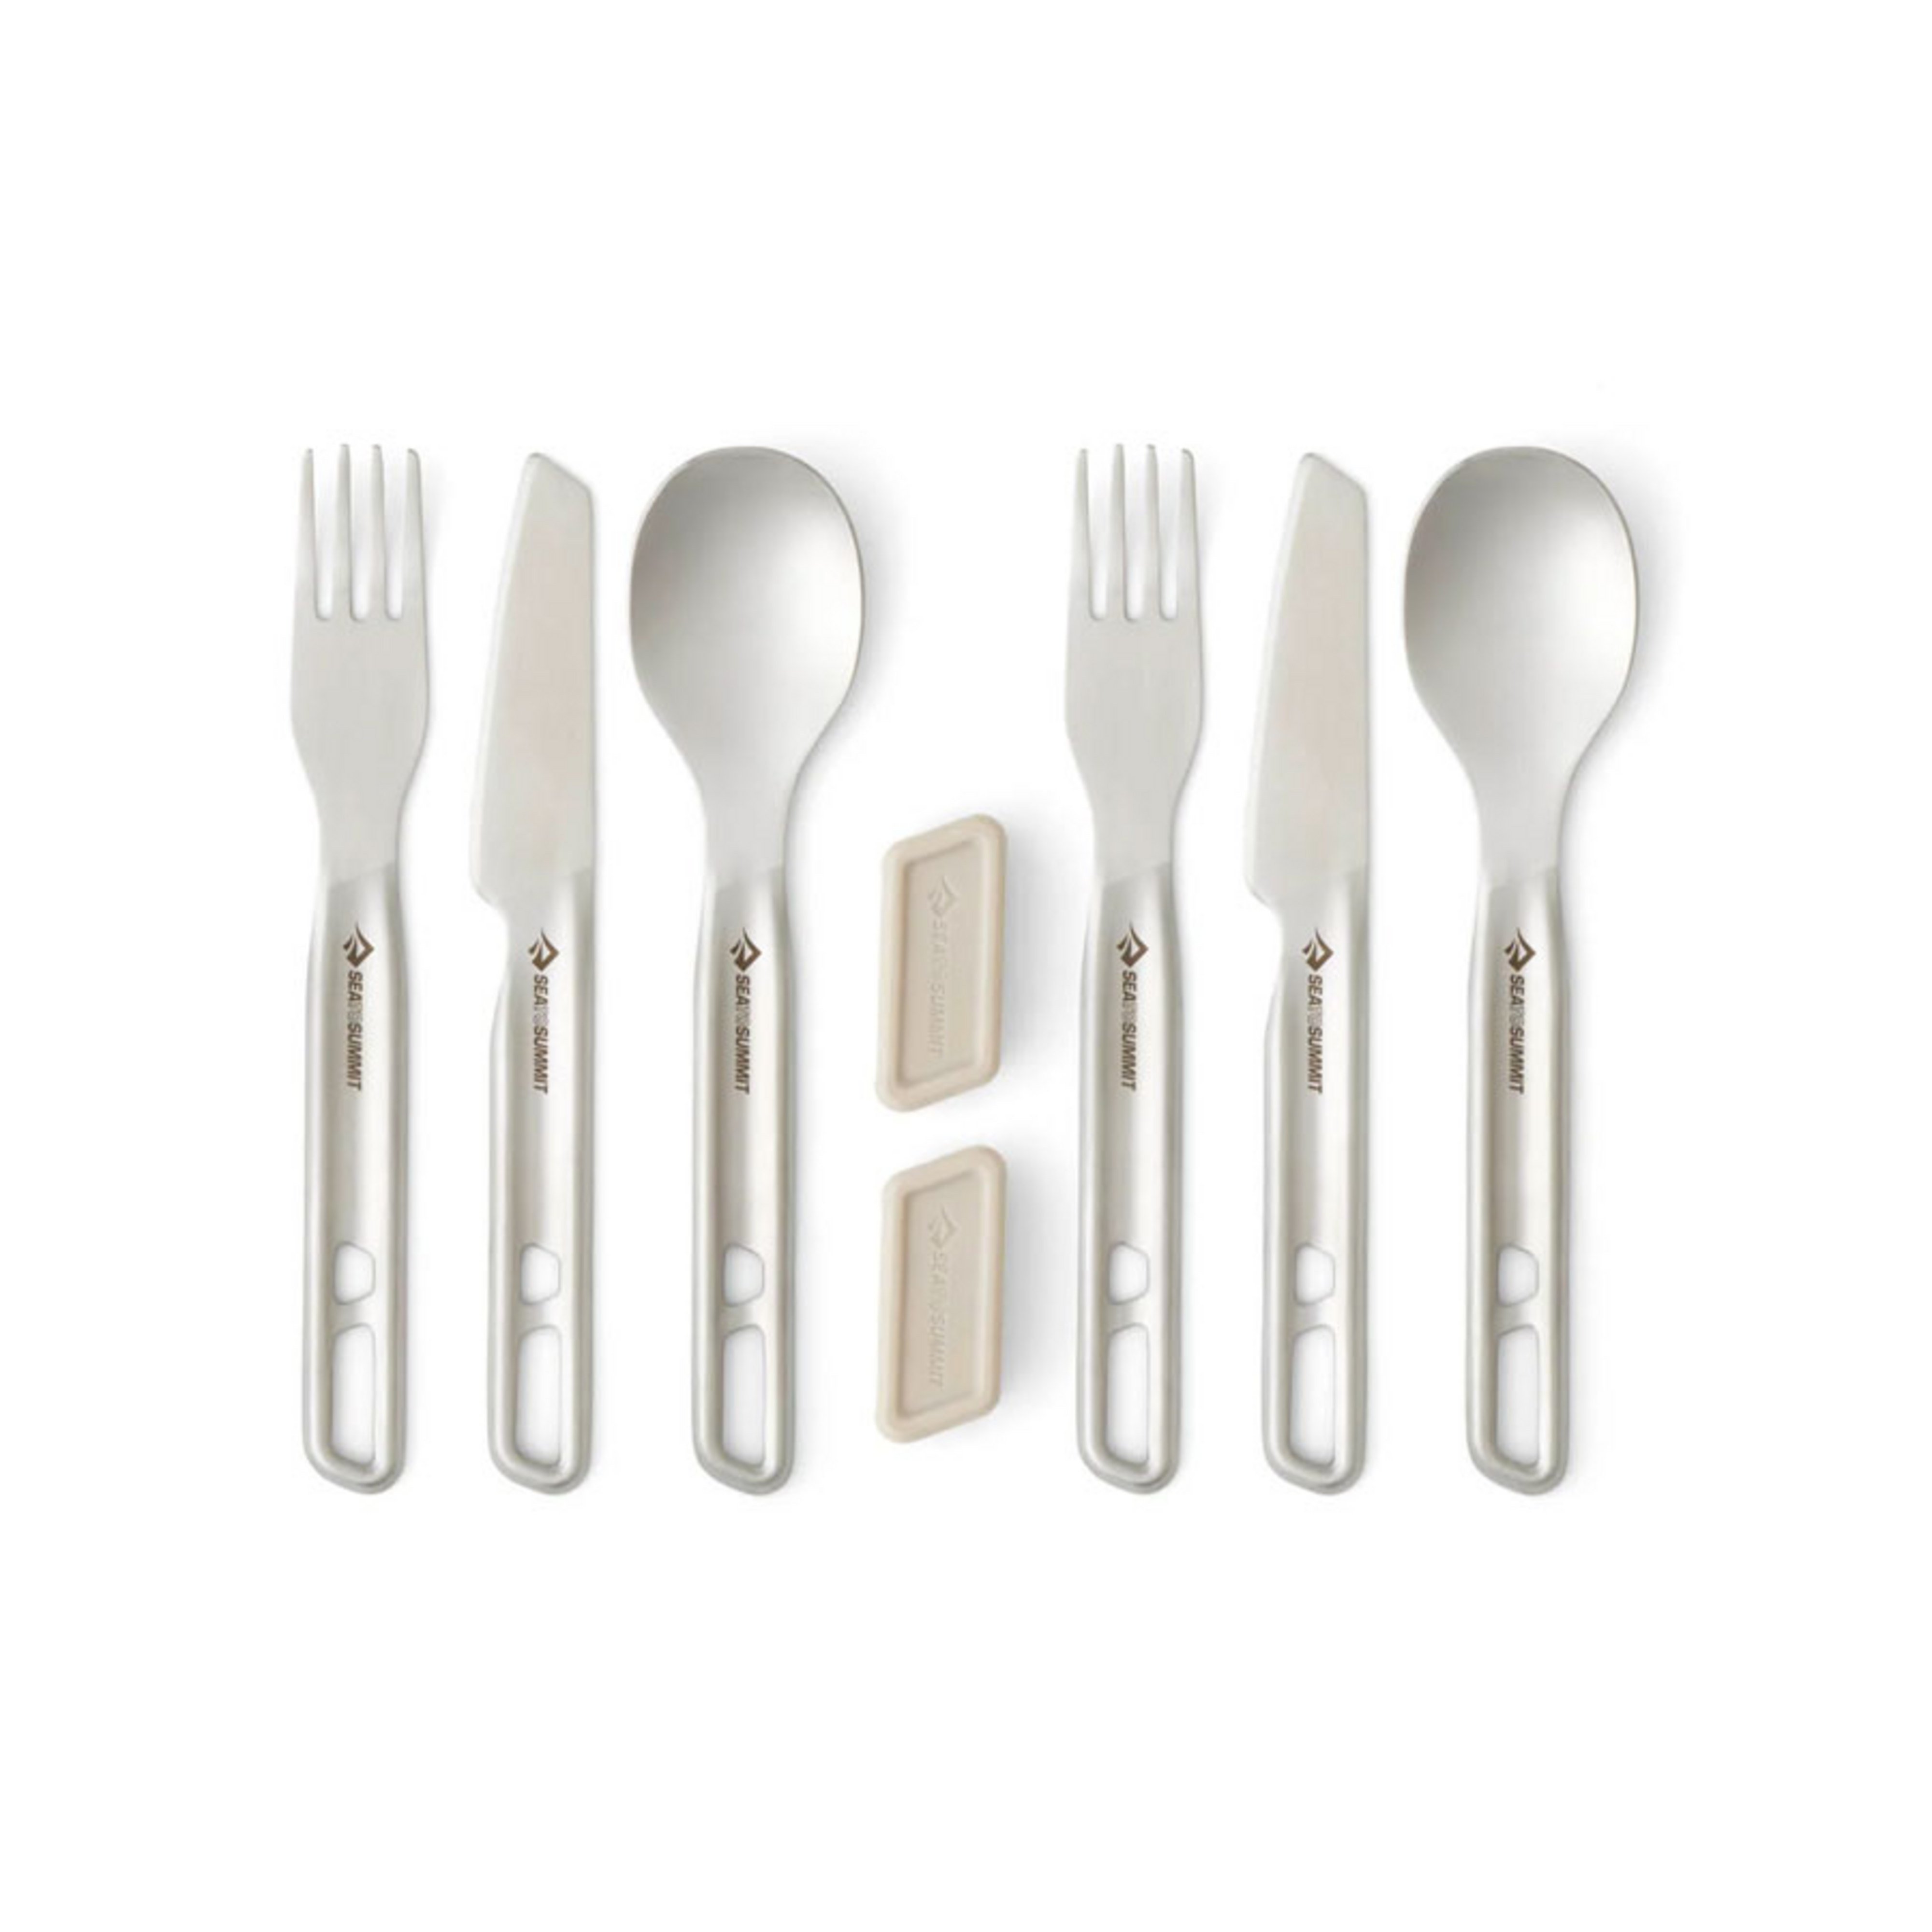 Sea To Summit Detour Stainless Steel Cutlery Set -6 Piece